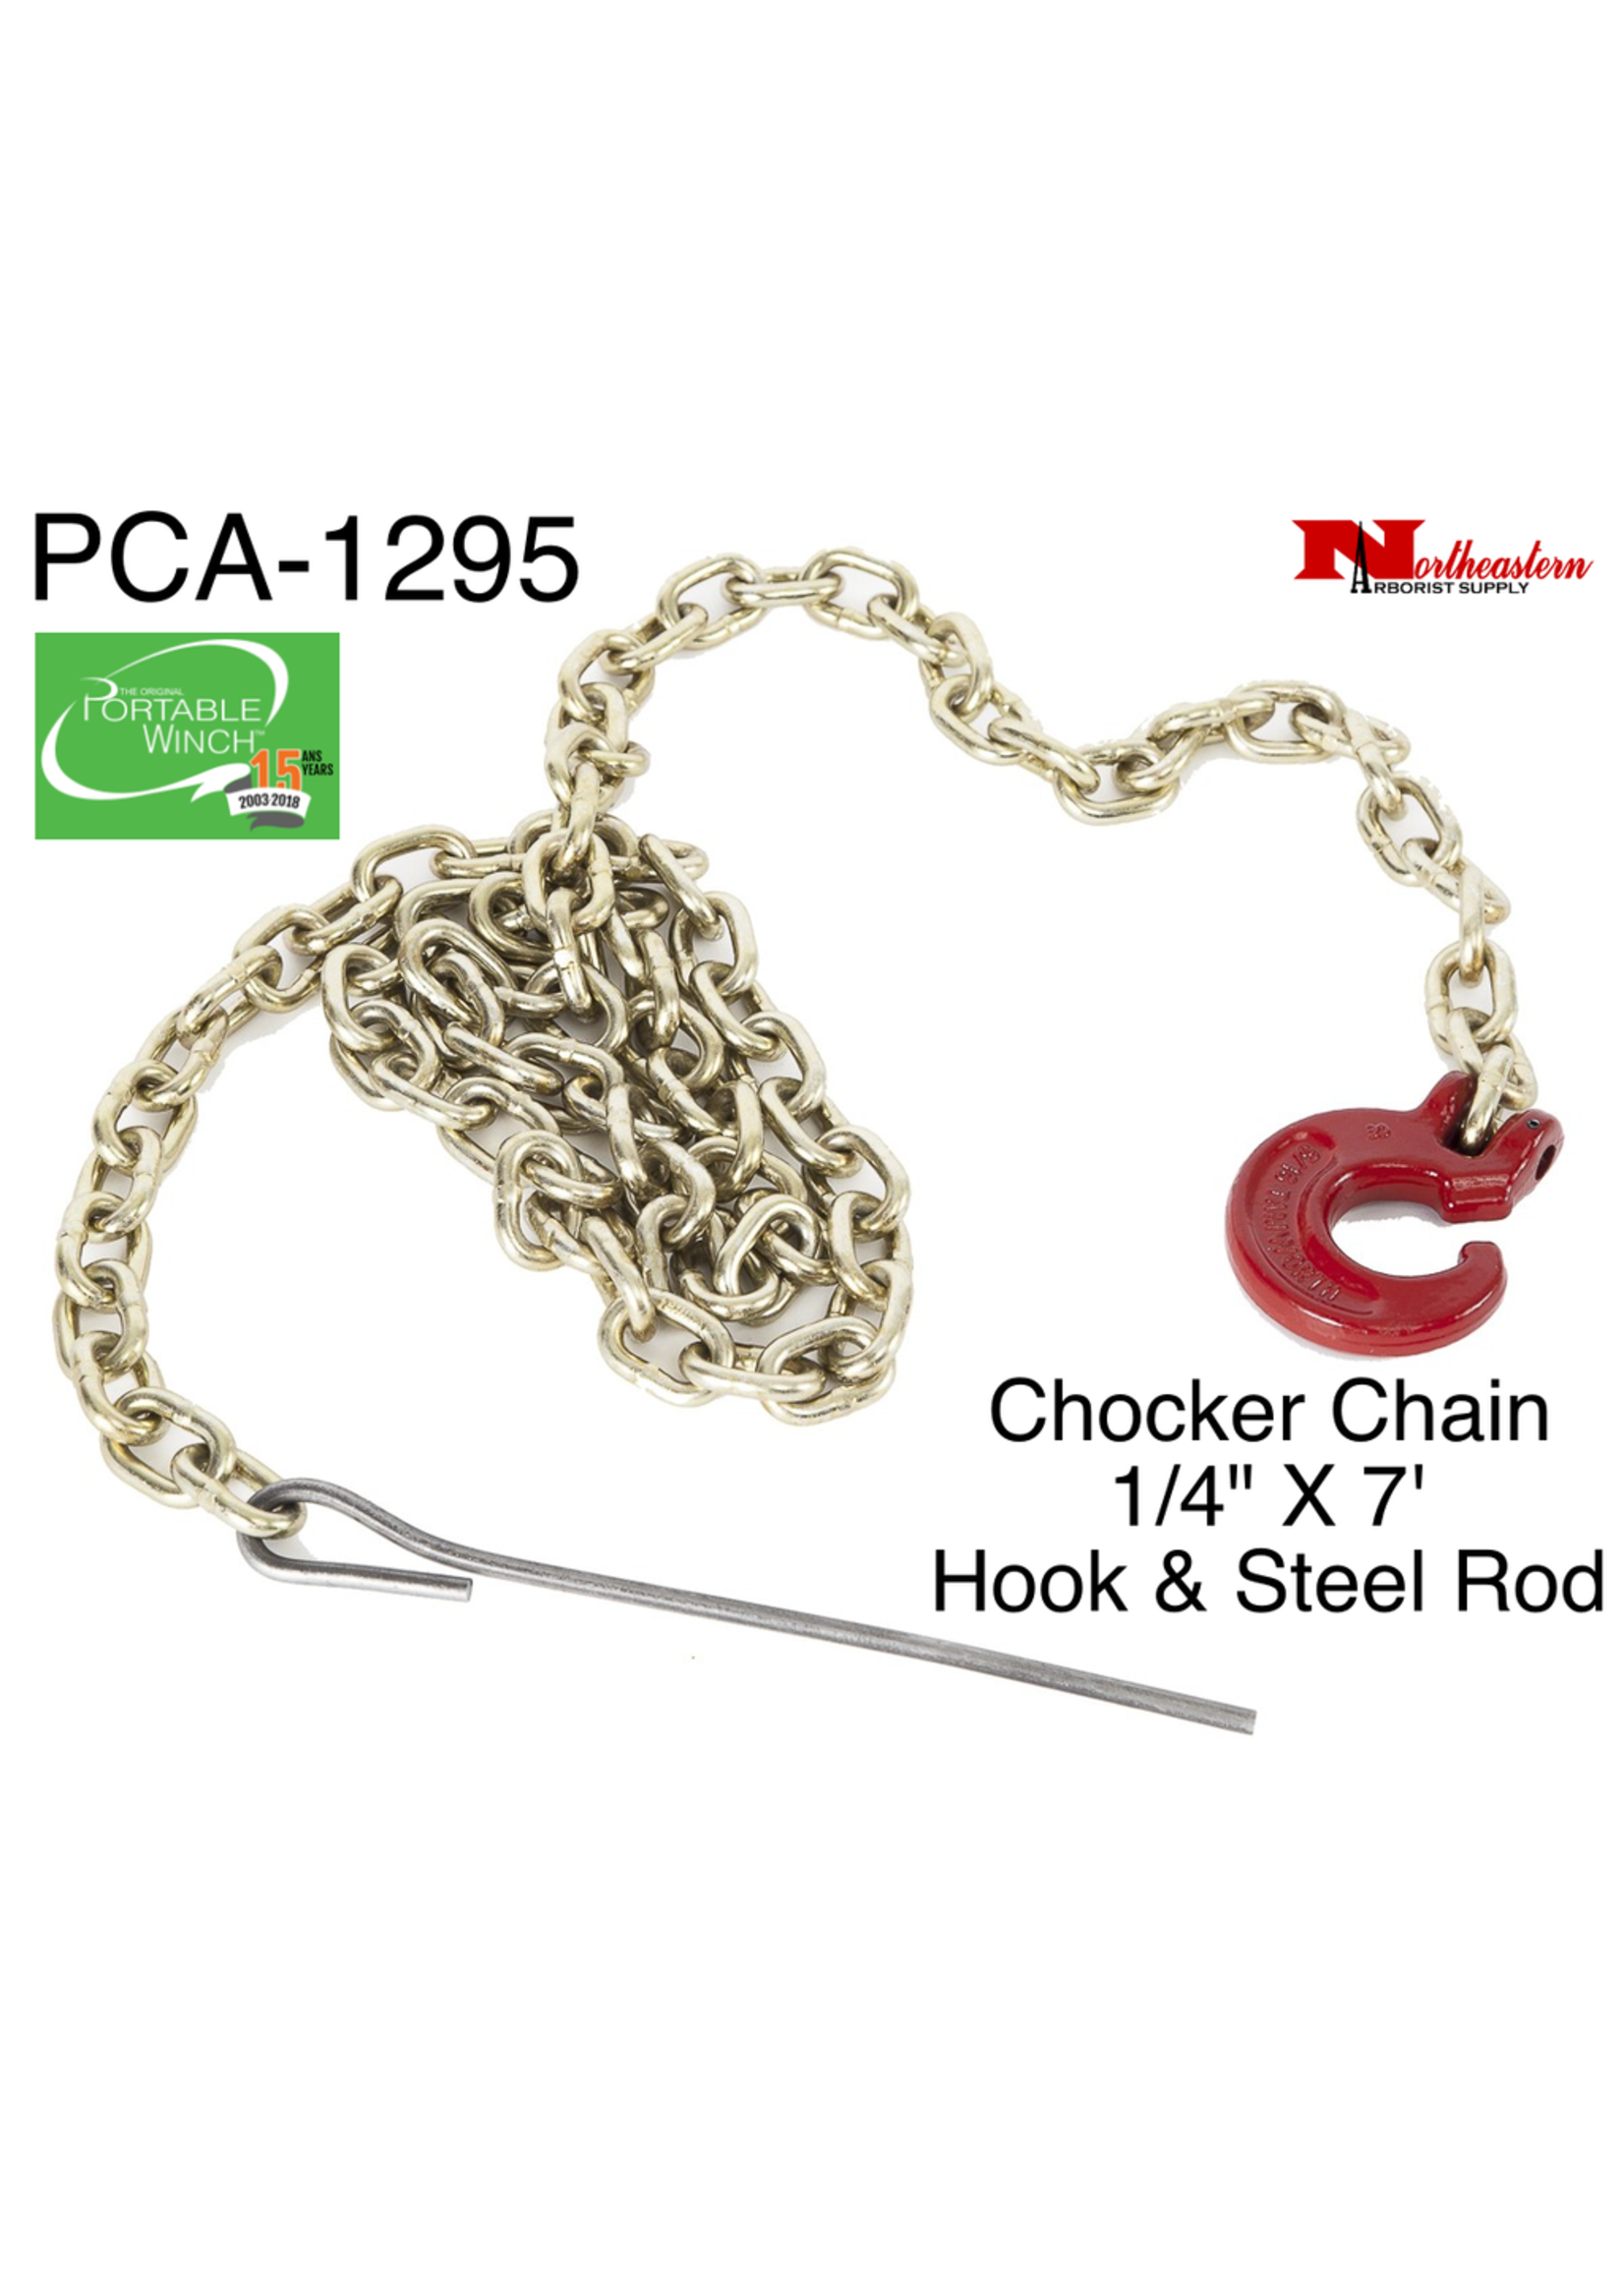 PORTABLE WINCH CO. Choker Chain 1/4" x 7" with Hook and Steel Rod